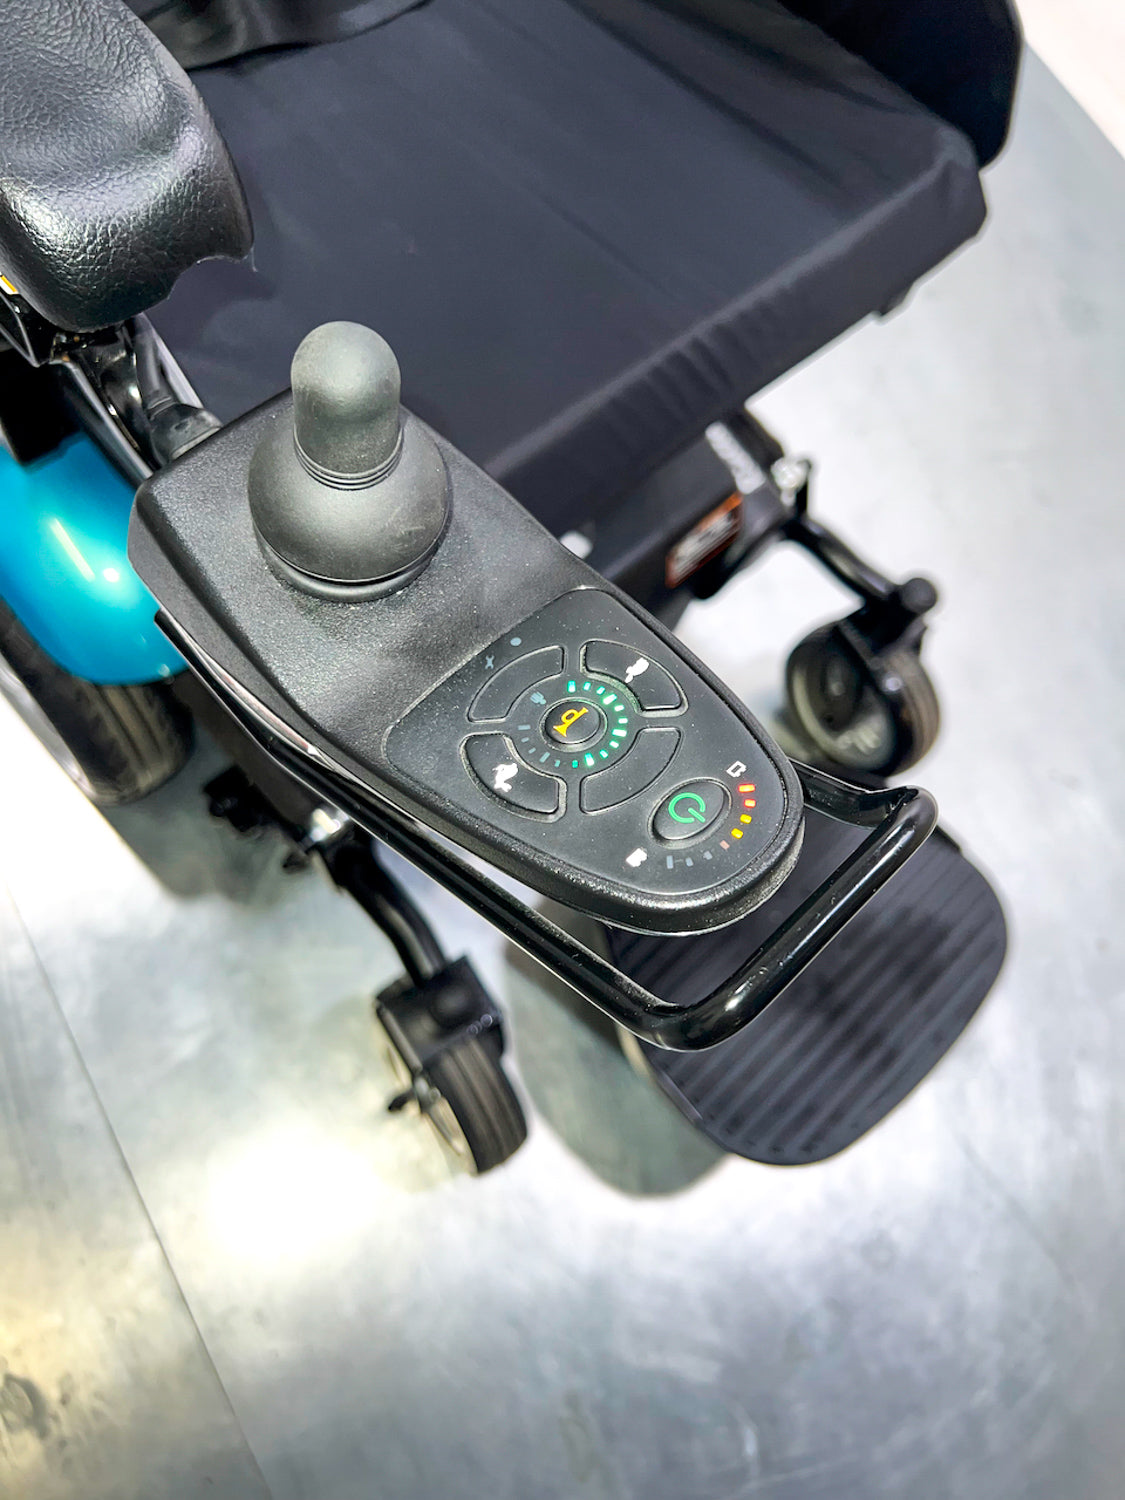 Rascal Realto Used Powerchair Electric Mobility Wheelchair Teal MWD Indoor Outdoor